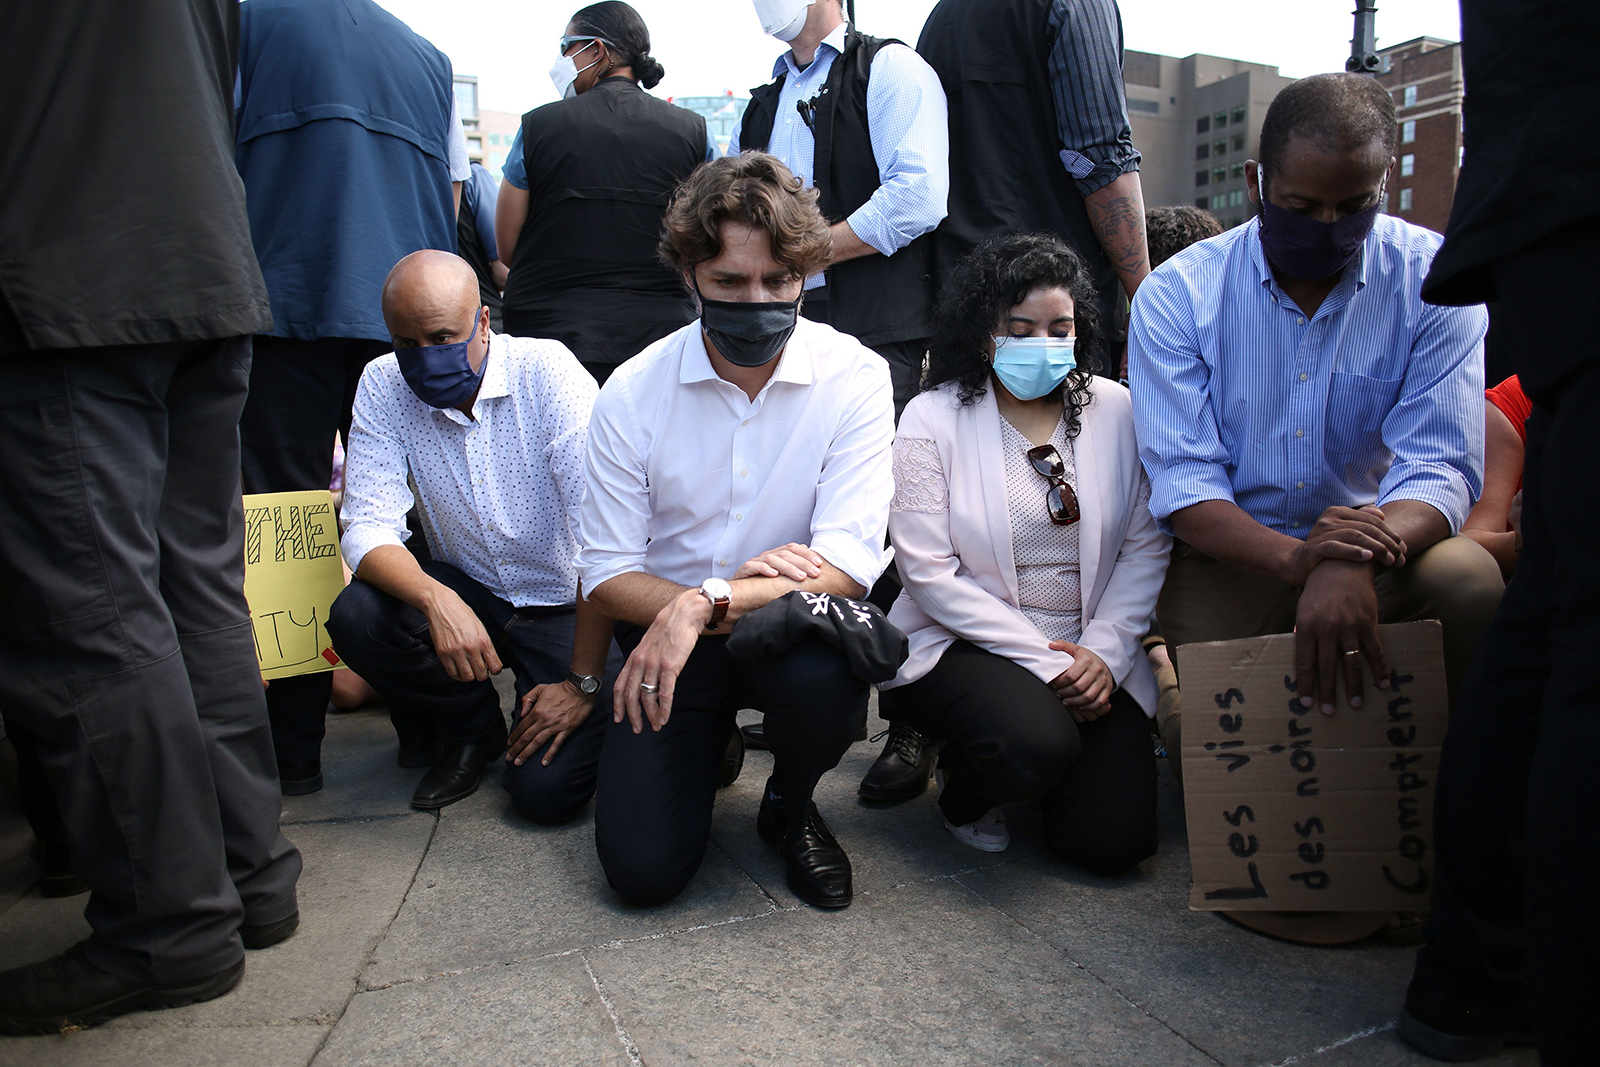 Canadian Prime Minister Justin Trudeau knelt on June 5 at the Black Life Issue protest at Parliament Hill in Ottawa, Canada.